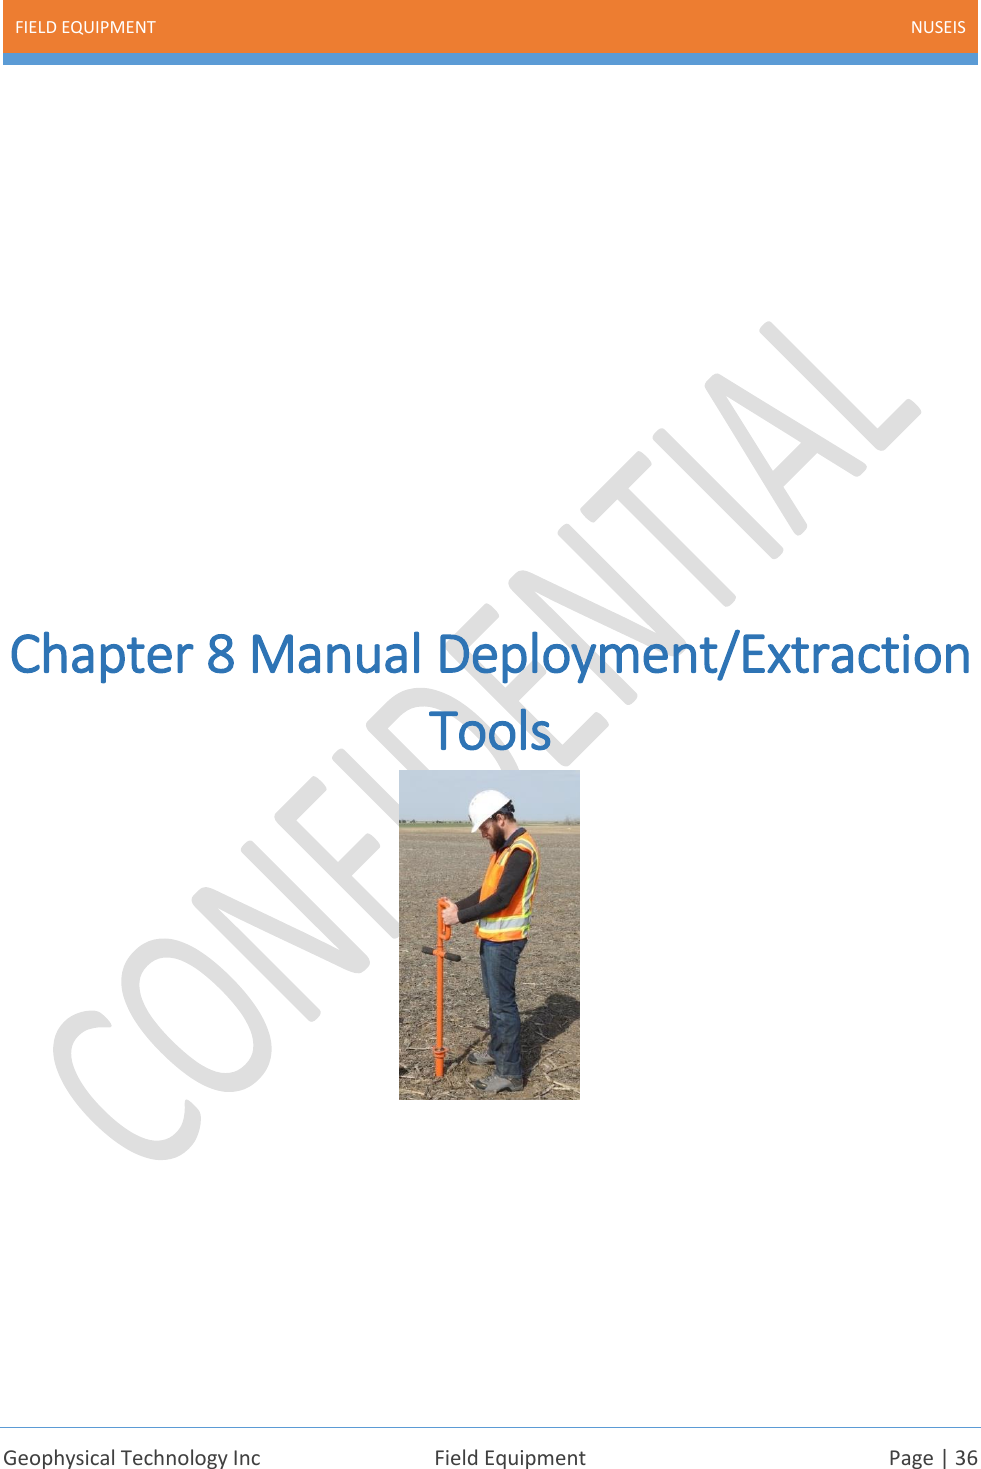 FIELD EQUIPMENT NUSEIS    Geophysical Technology Inc  Field Equipment  Page | 36             Chapter 8 Manual Deployment/Extraction Tools        